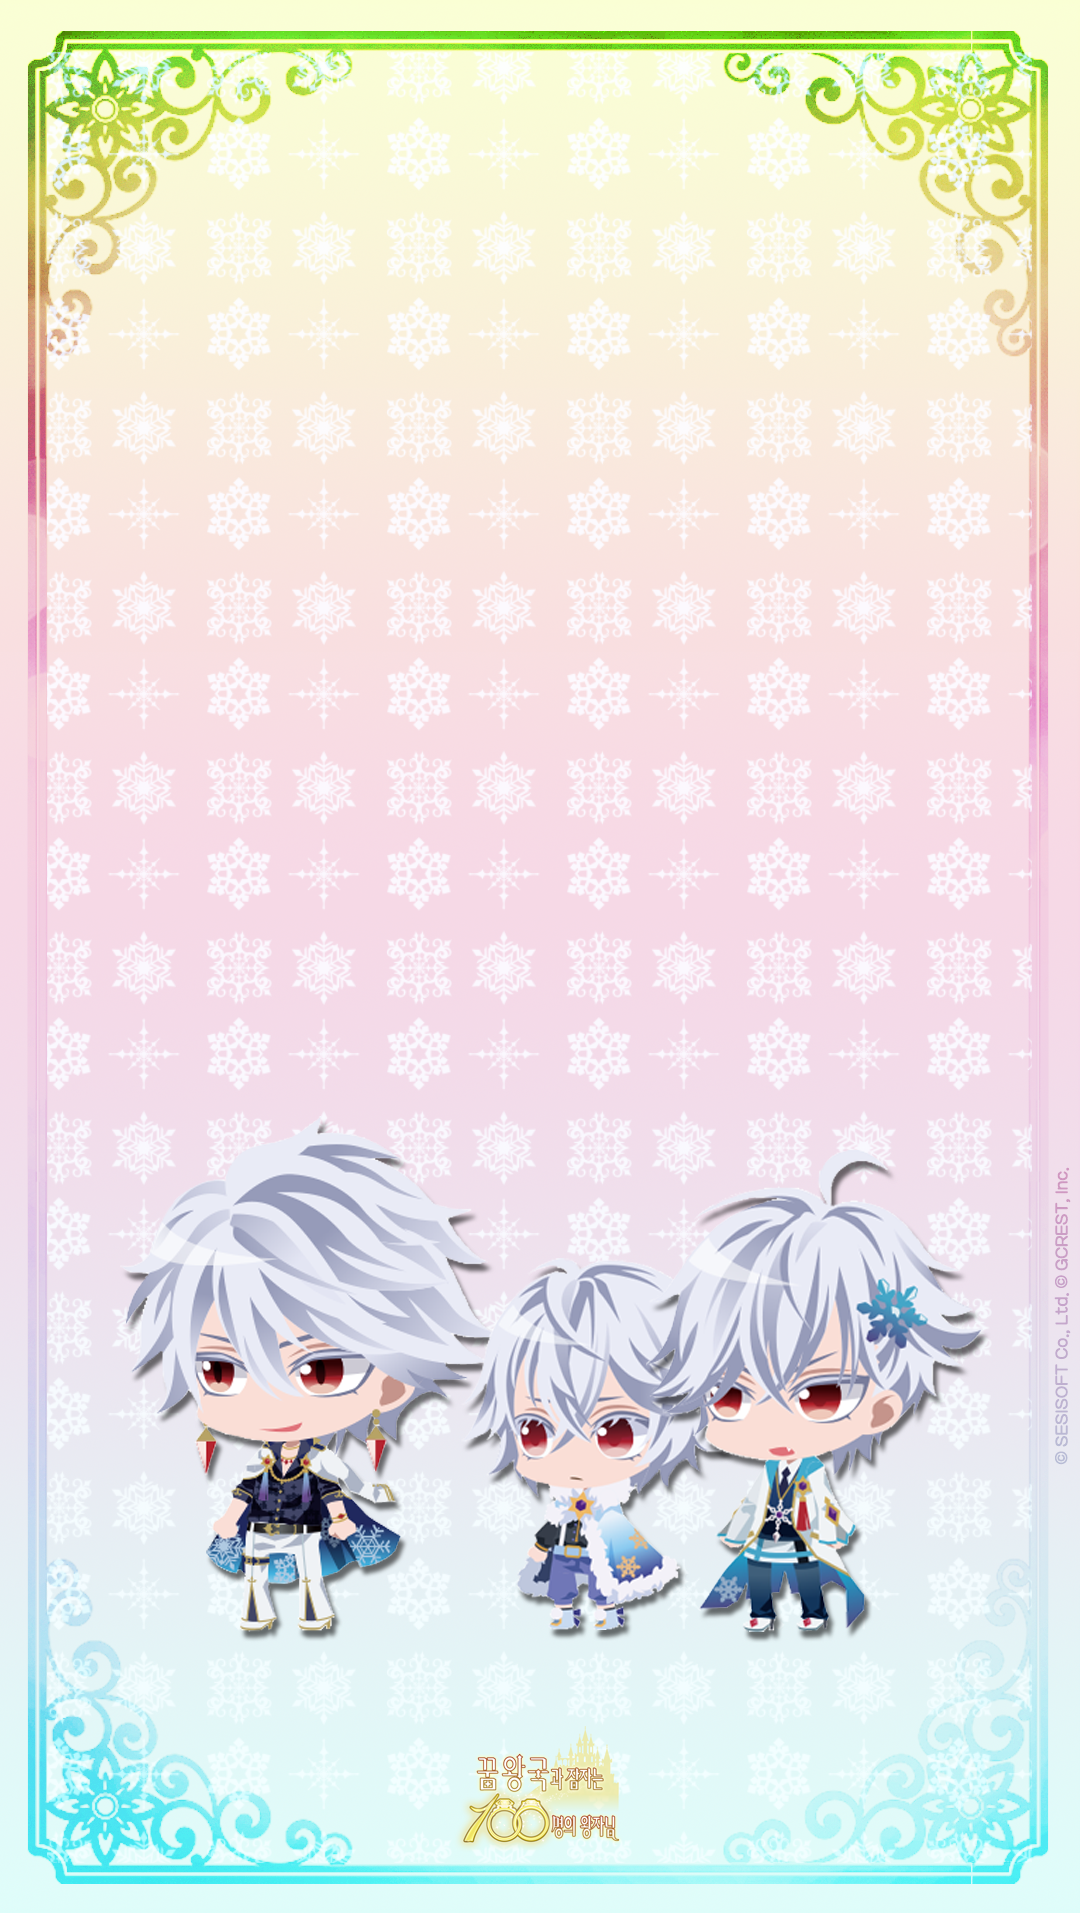 hpbg_android_snow_1080.png